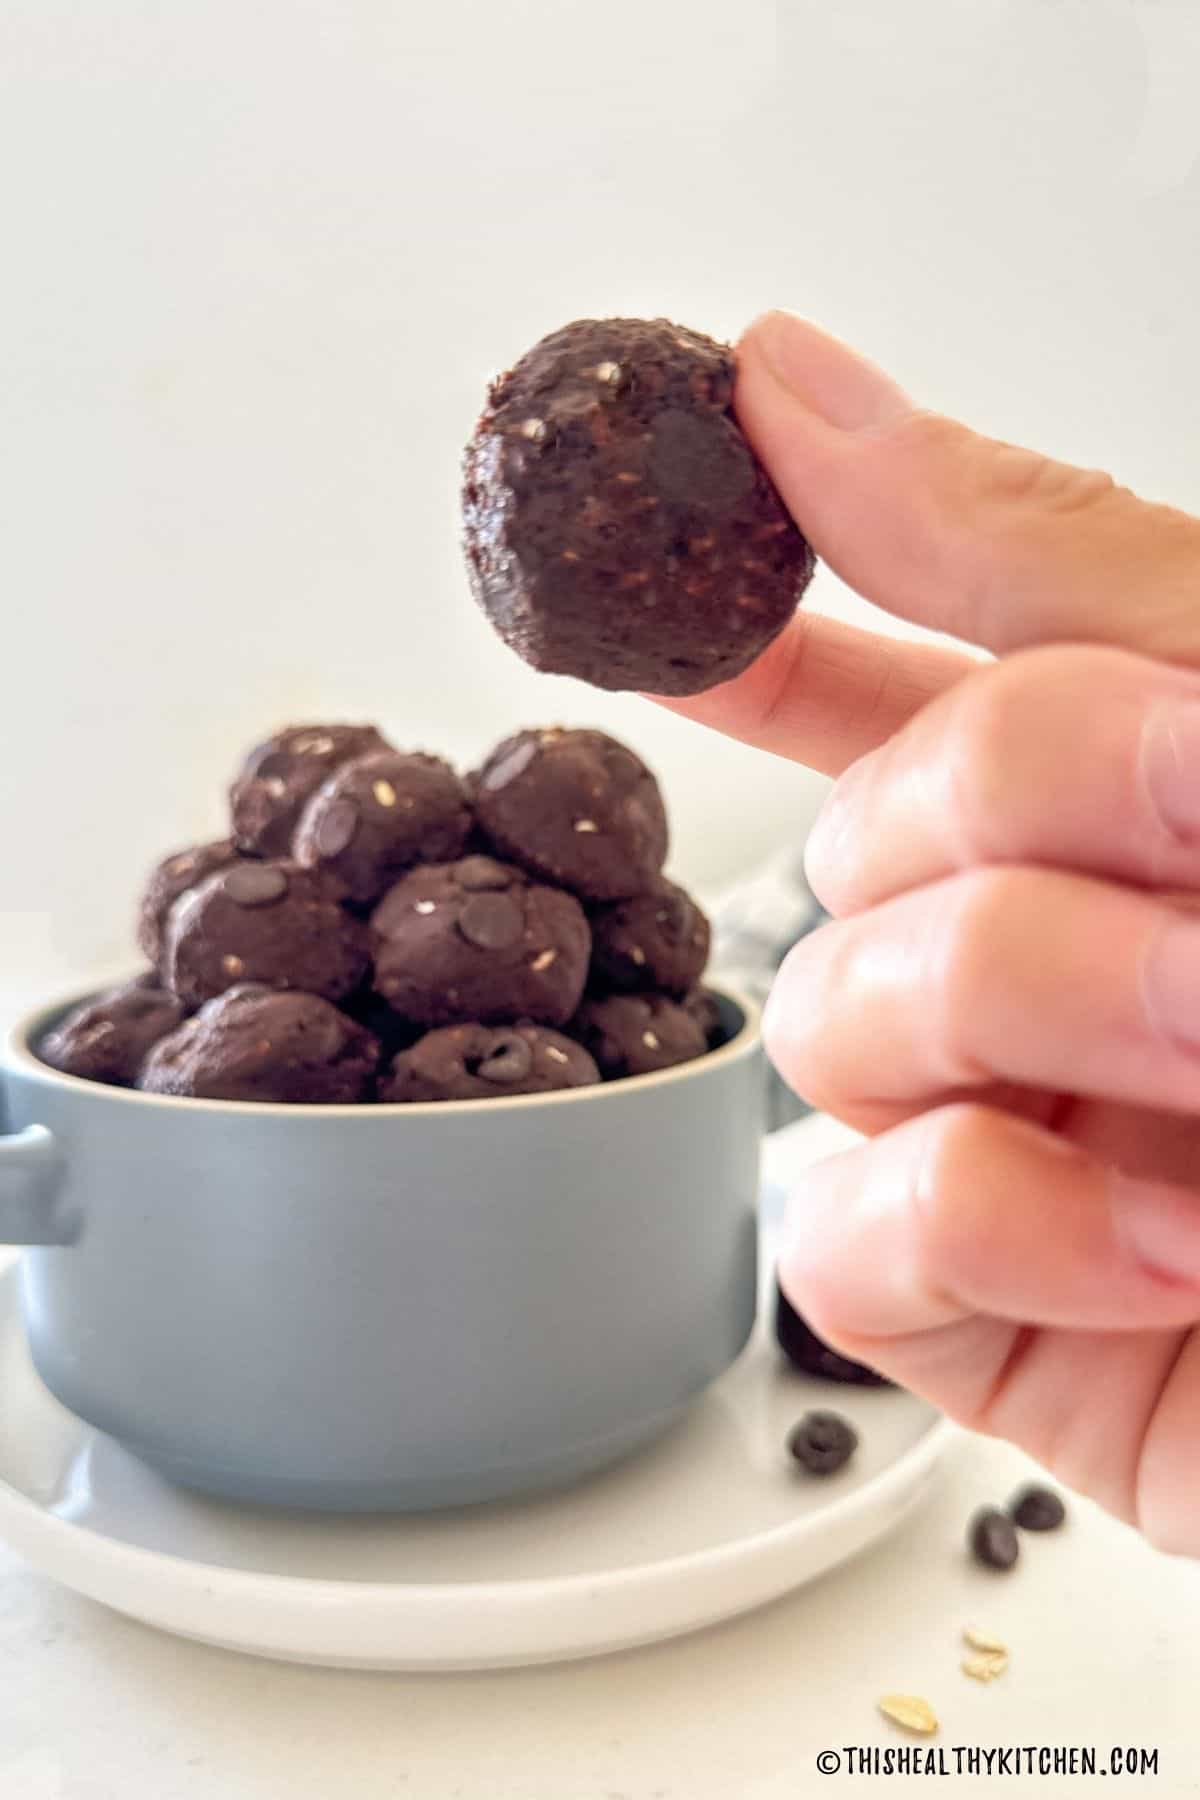 Hand holding up a round chocolate ball with more in the background.